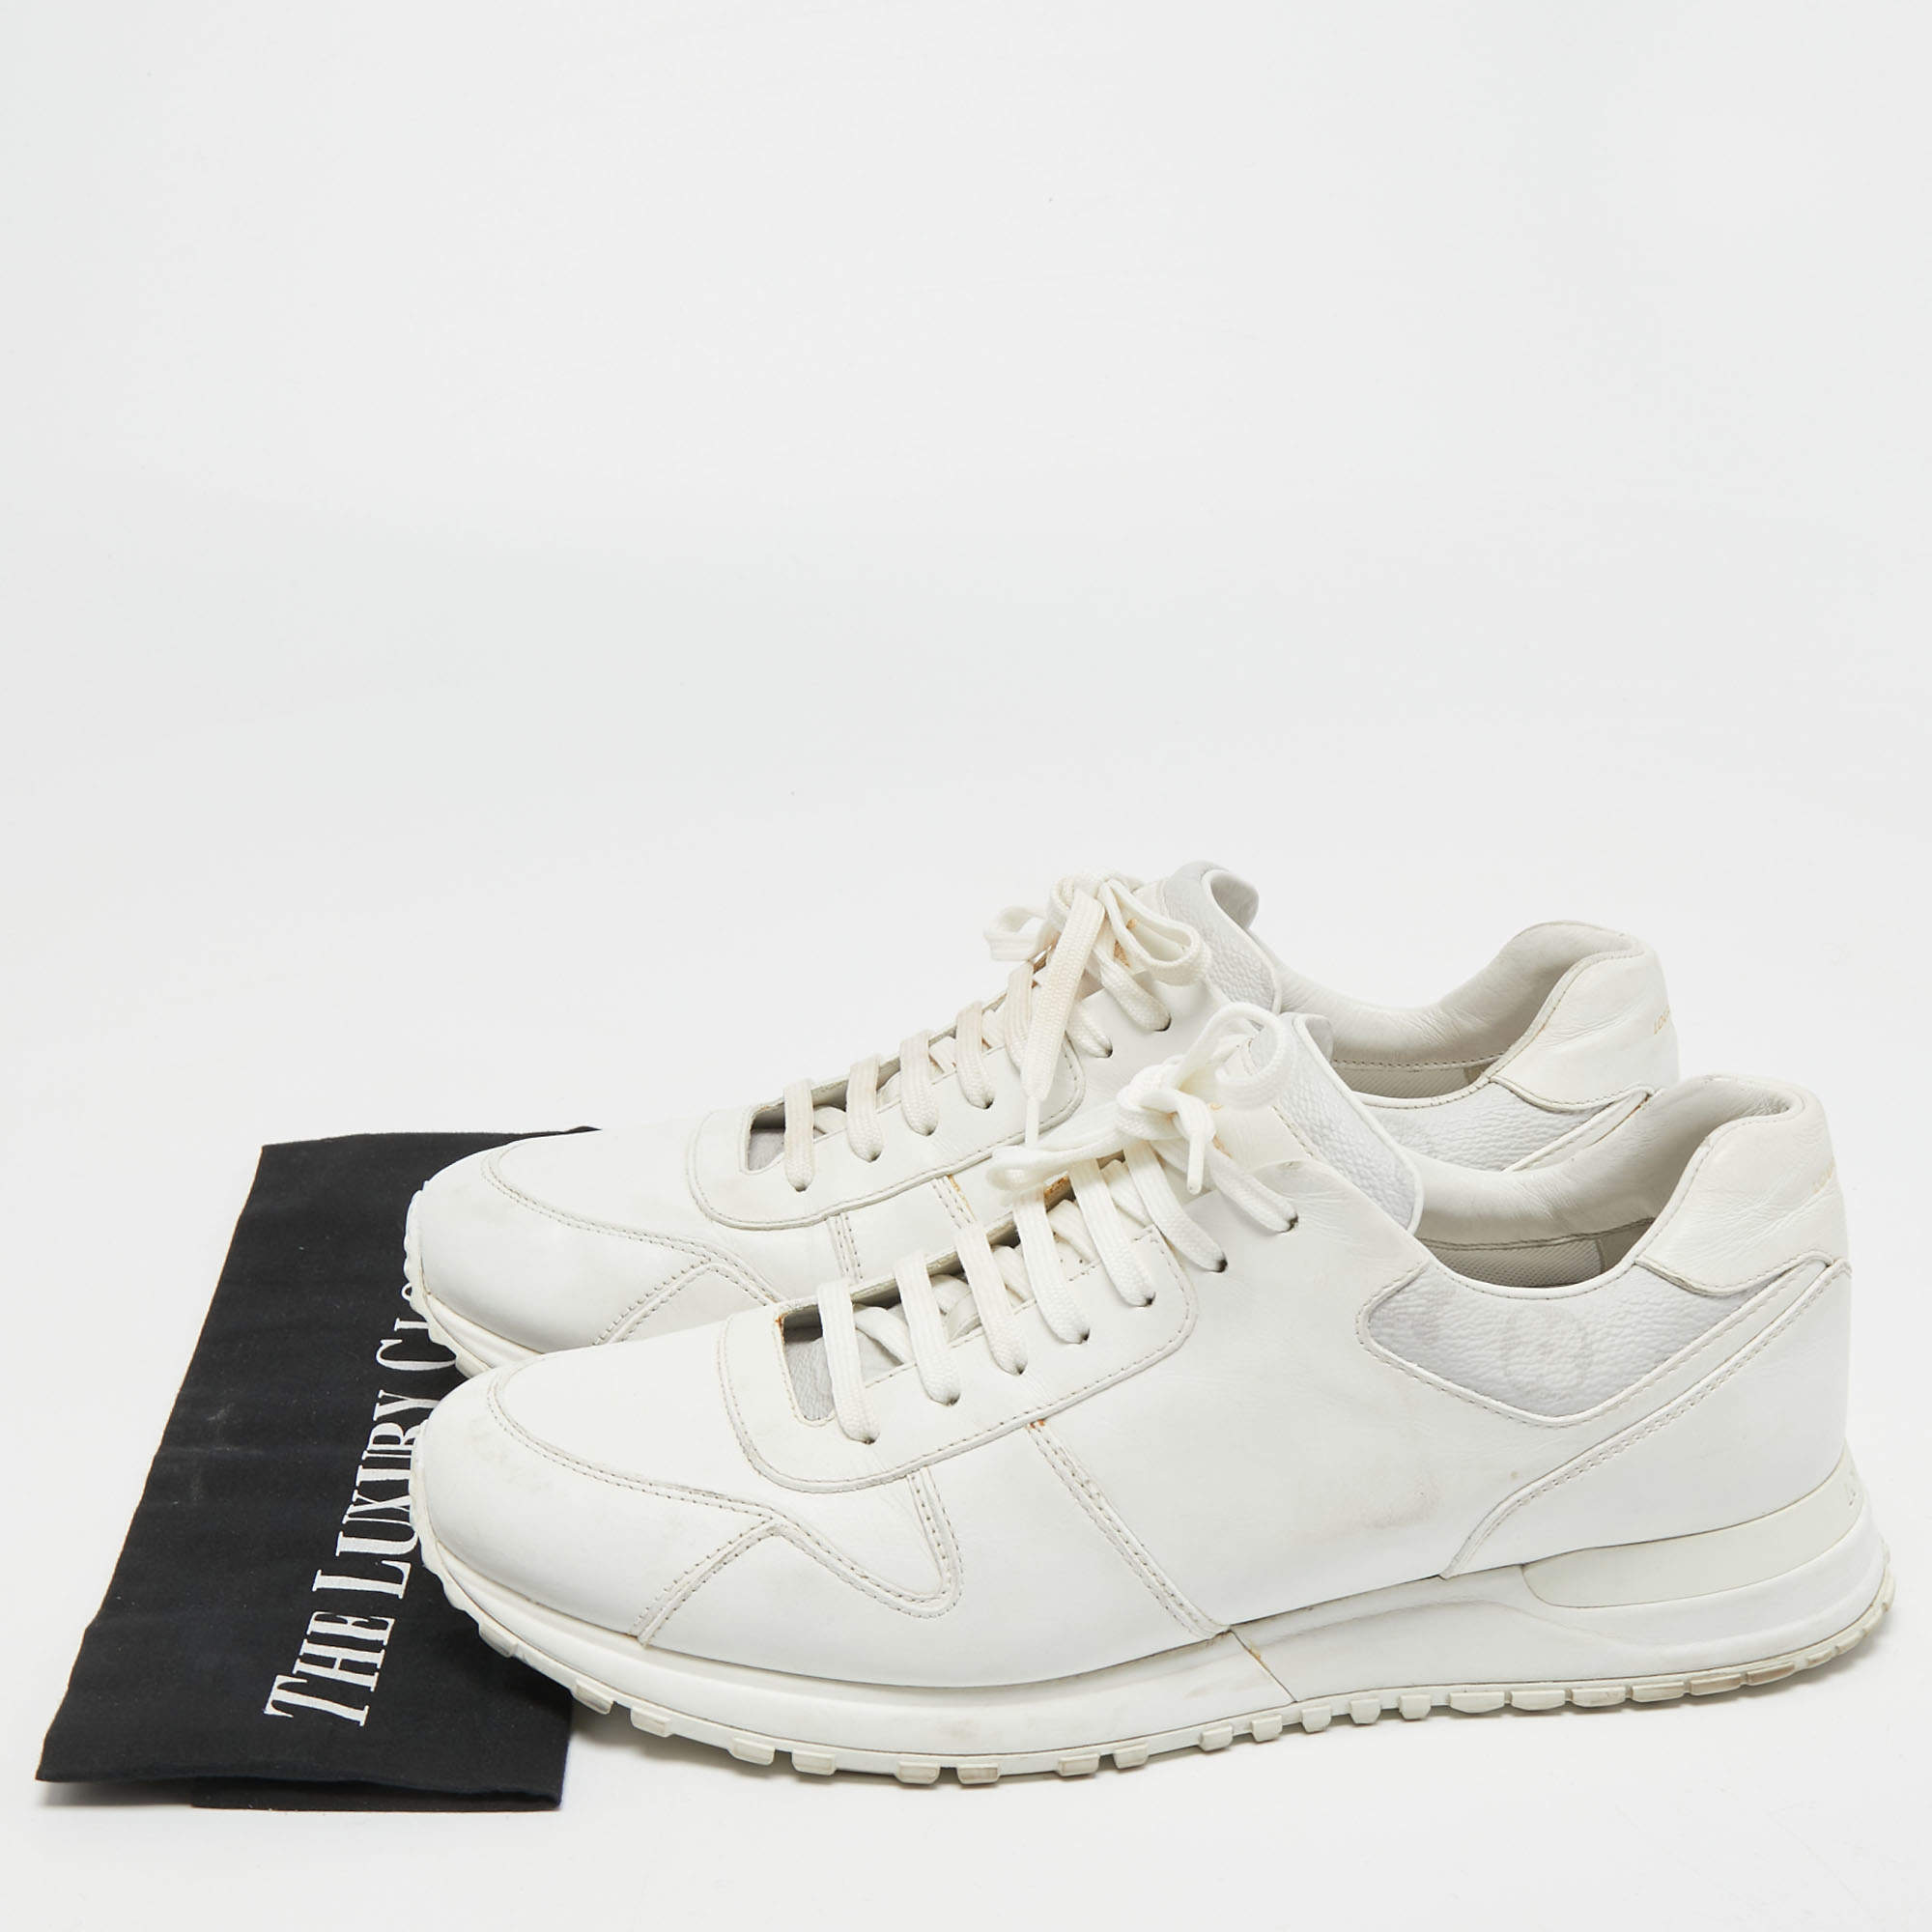 Run away leather trainers Louis Vuitton White size 37 EU in Leather -  34247451